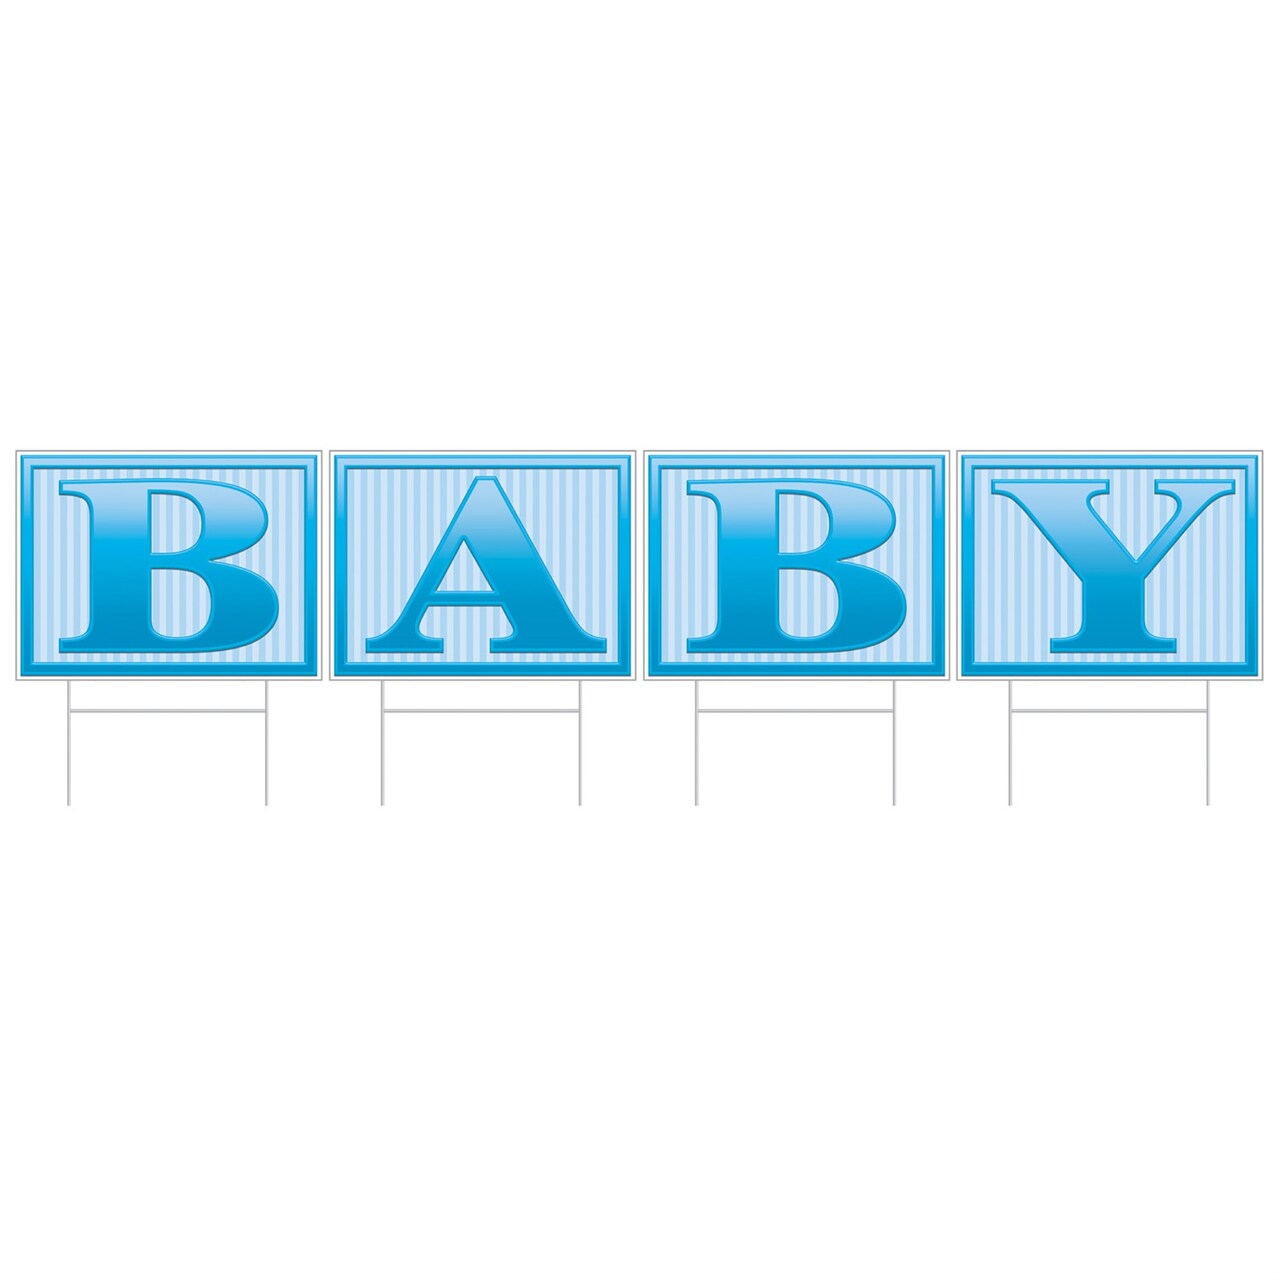 Plastic Baby Yard Sign, (Pack of 6)